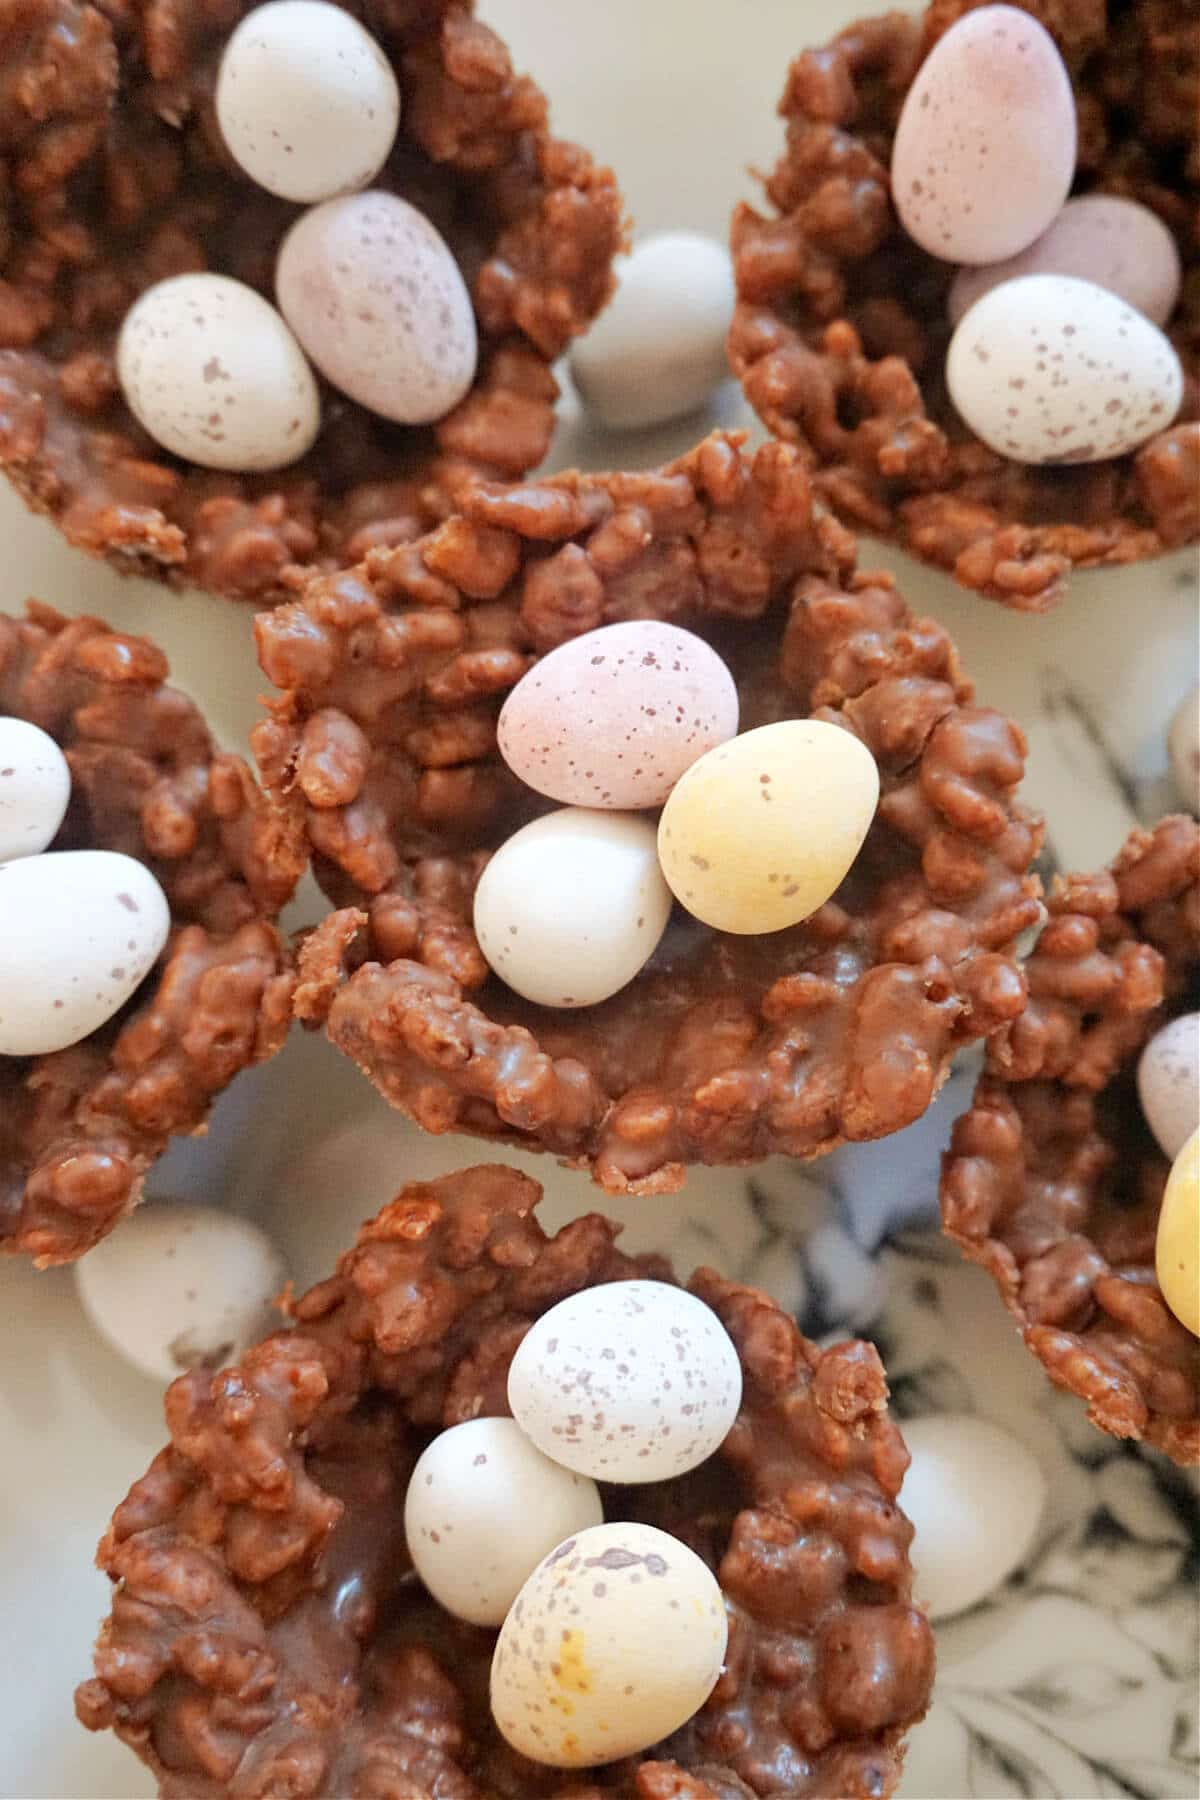 Overhead shot of 6 chocolate rice krispie nests filled with 3 mini chocolate eggs each.